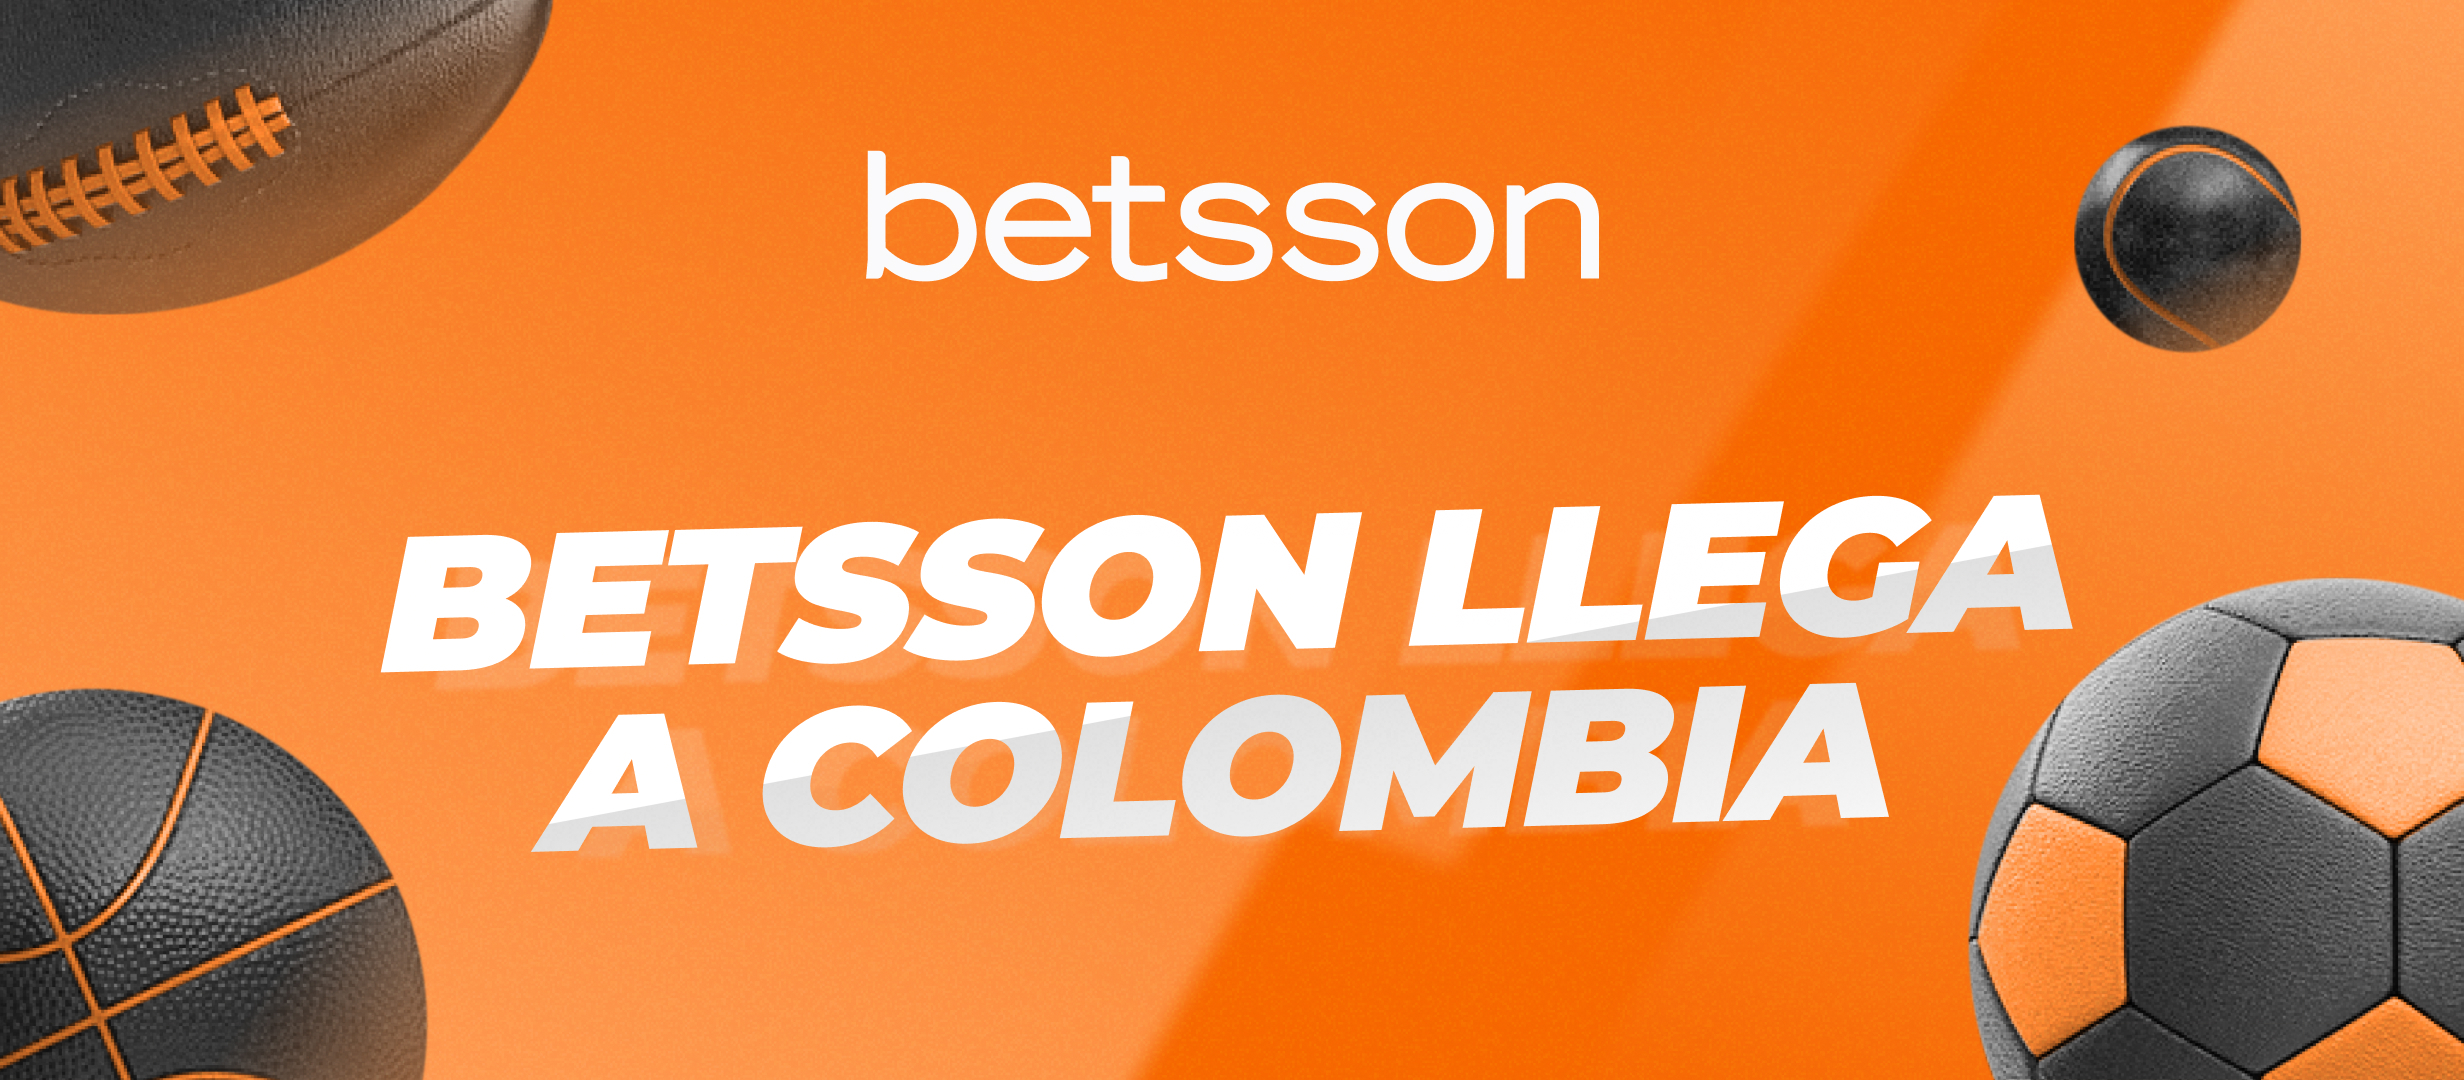 Betsson llega a Colombia